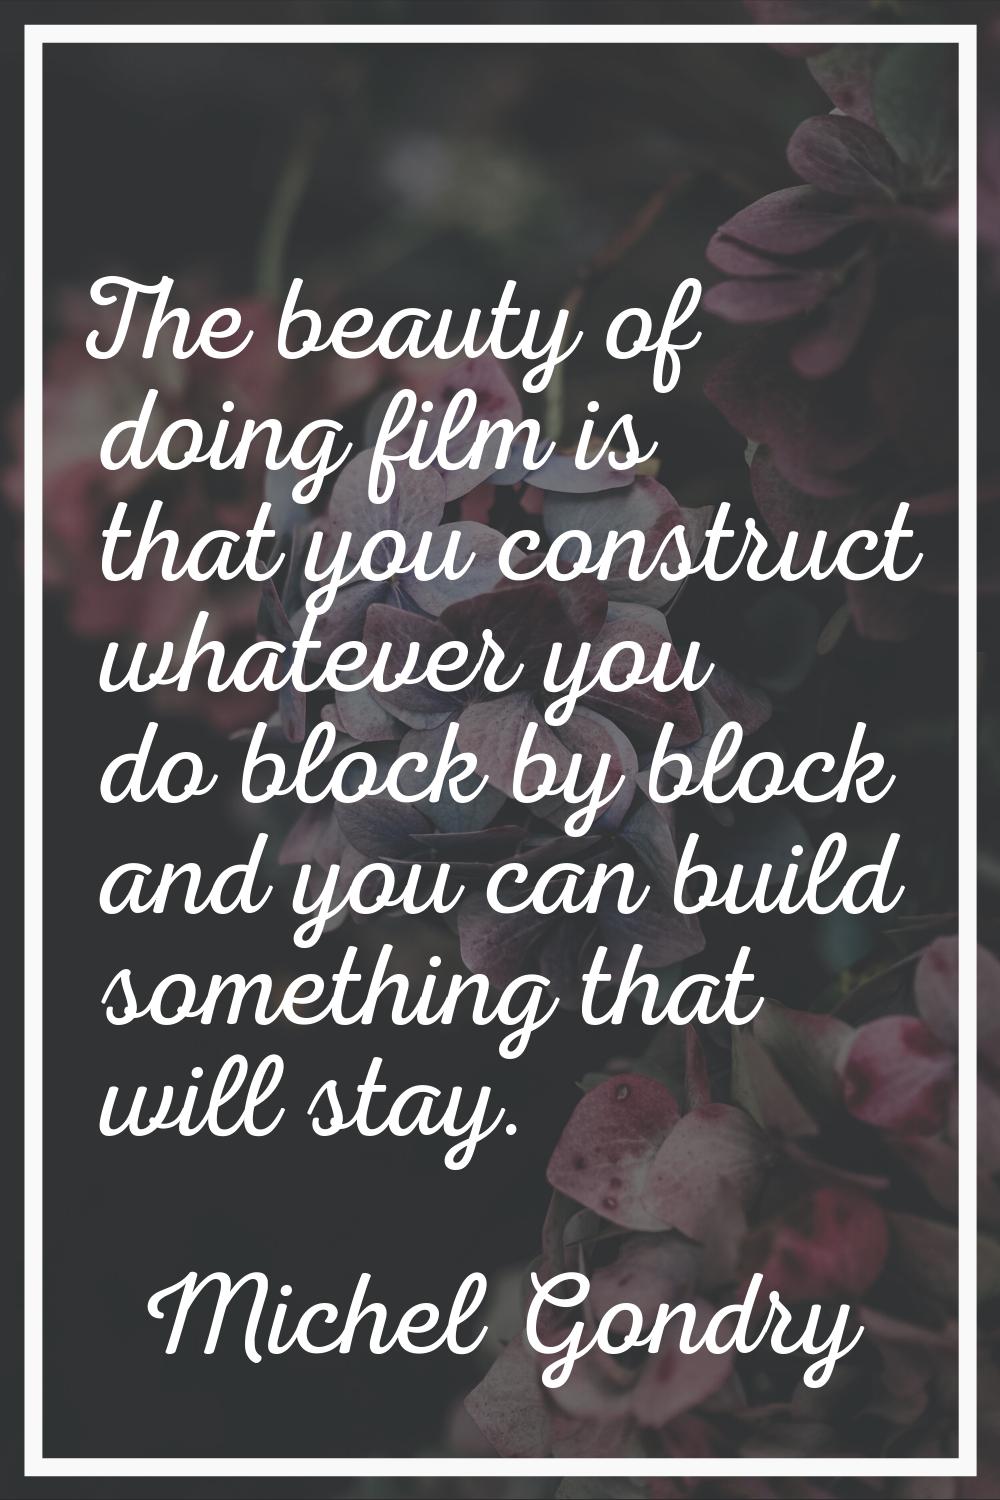 The beauty of doing film is that you construct whatever you do block by block and you can build som